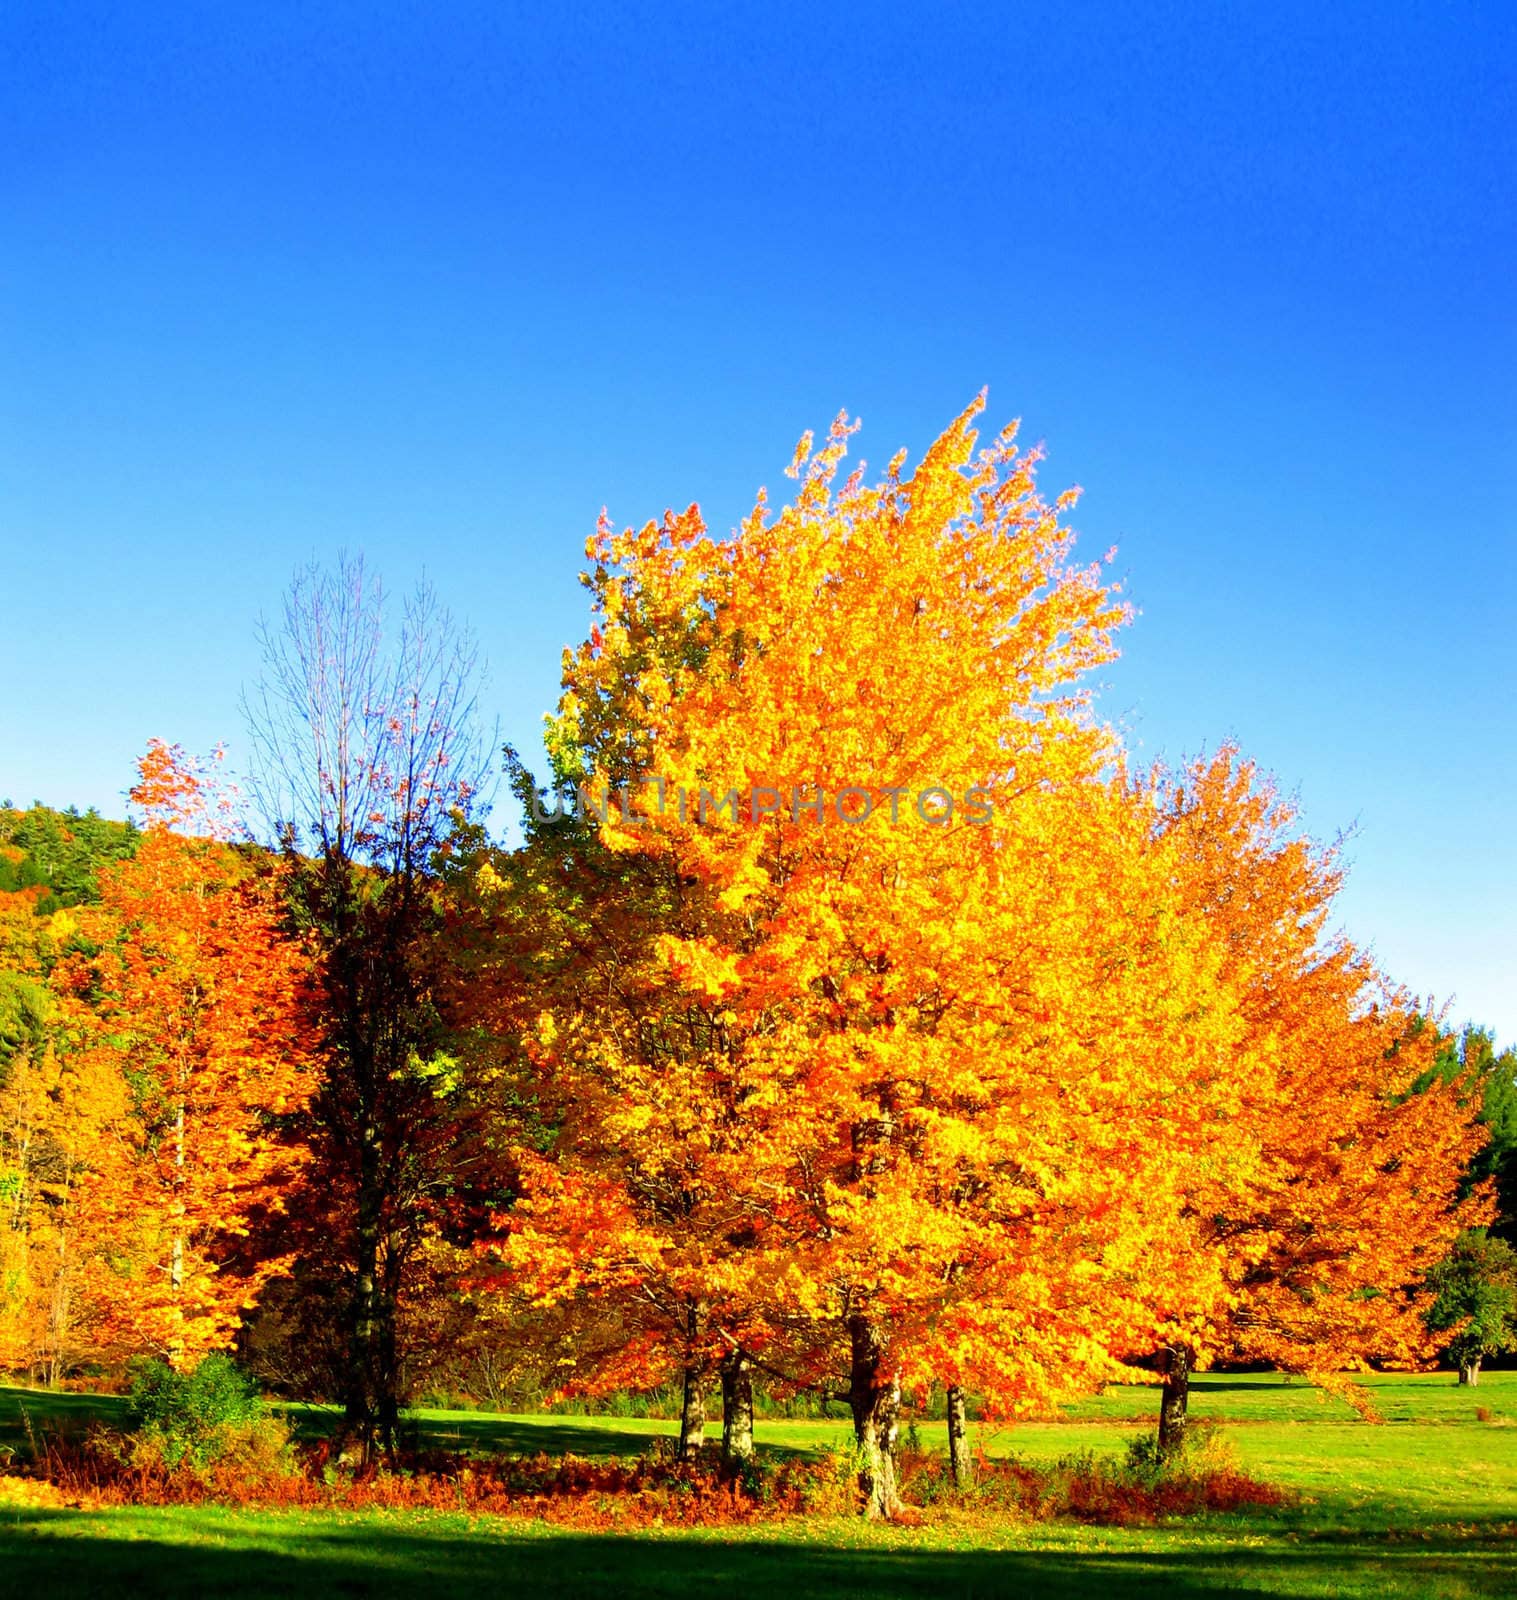 At the edge of a field, a stand of golden-toned maples changing in Autumn, contrast boldly against a vibrant blue sky
